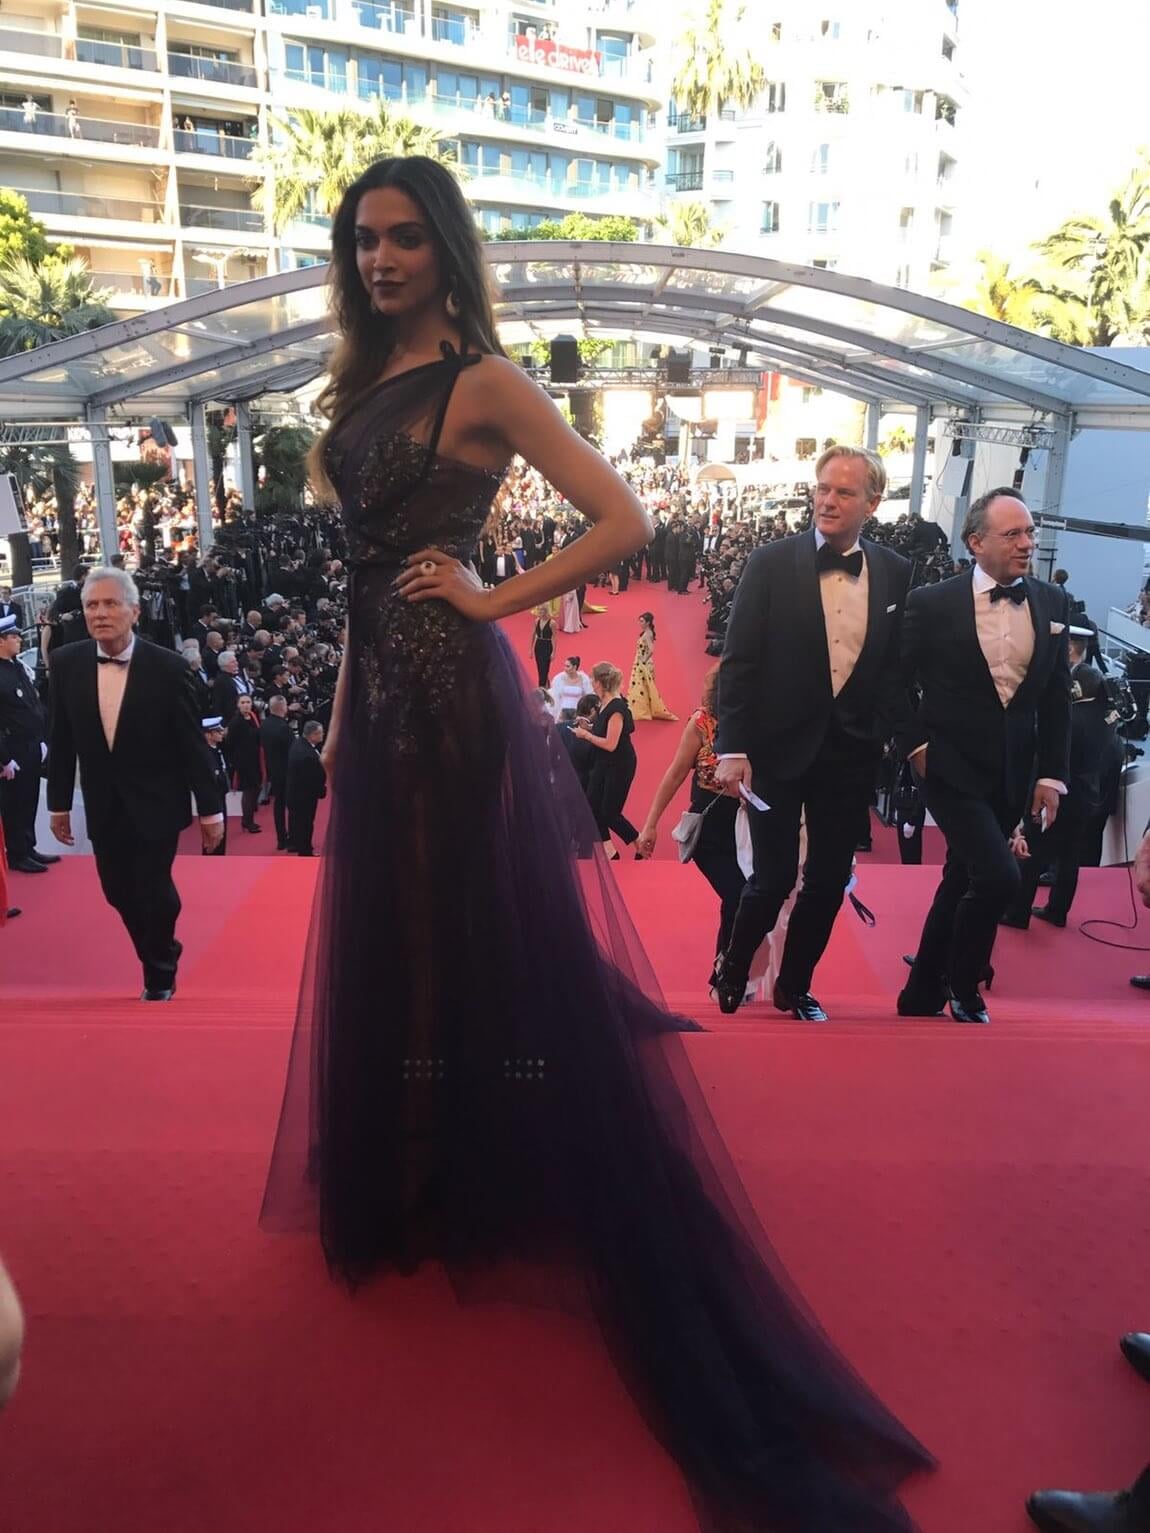 thequint%2F2017-05%2F705f1c7d-caff-415d-8f59-95d0d7c03bef%2FDeepika Padukone on the Cannes Film Festival Red Carpet (3) (1)